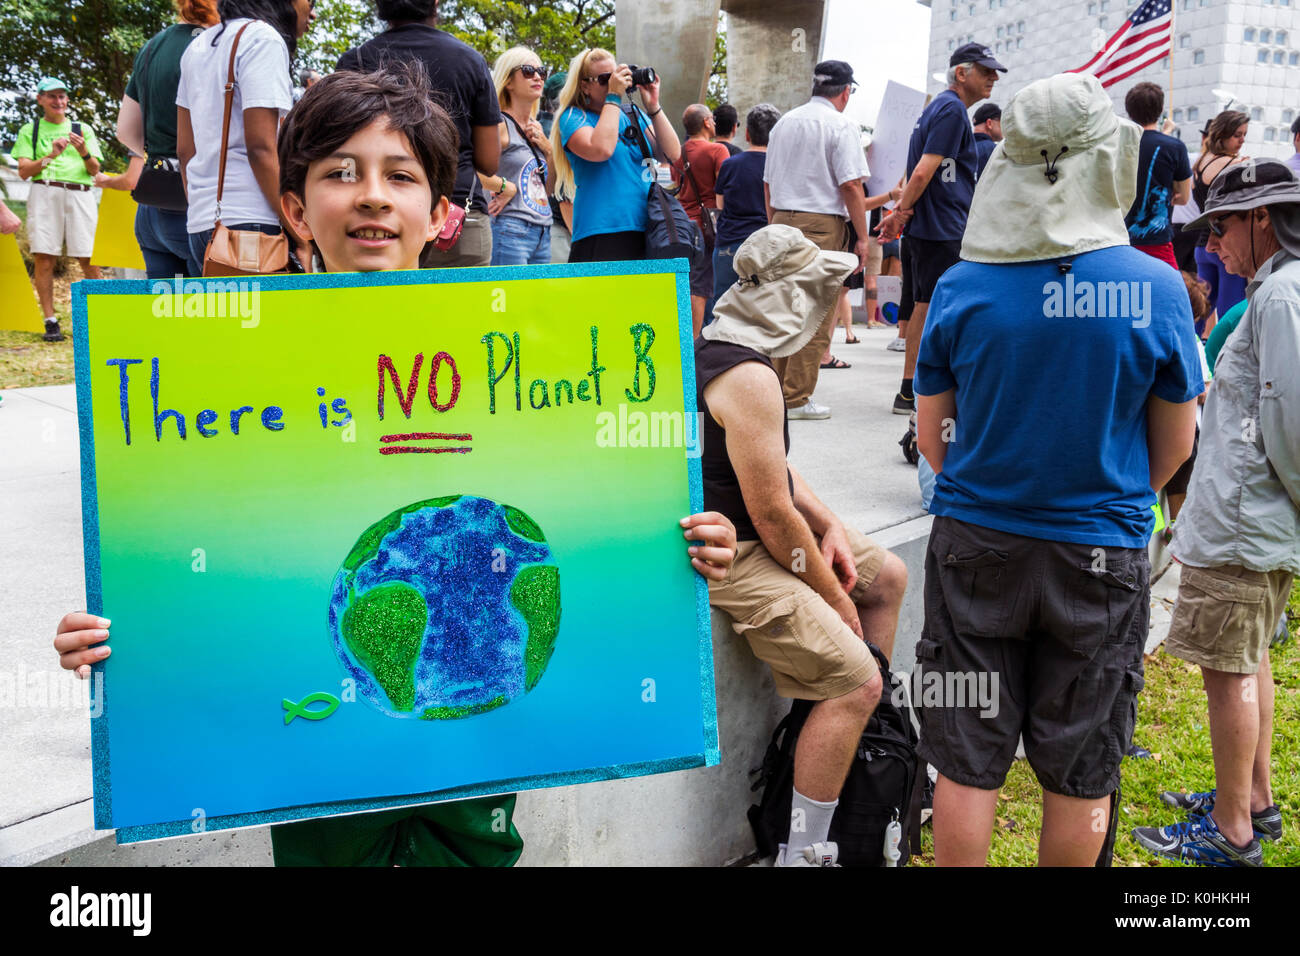 Miami Florida,Museum Park,March for Science,protest,rally,sign,poster,protester,boy boys,male kid kids child children youngster,student students pupil Stock Photo